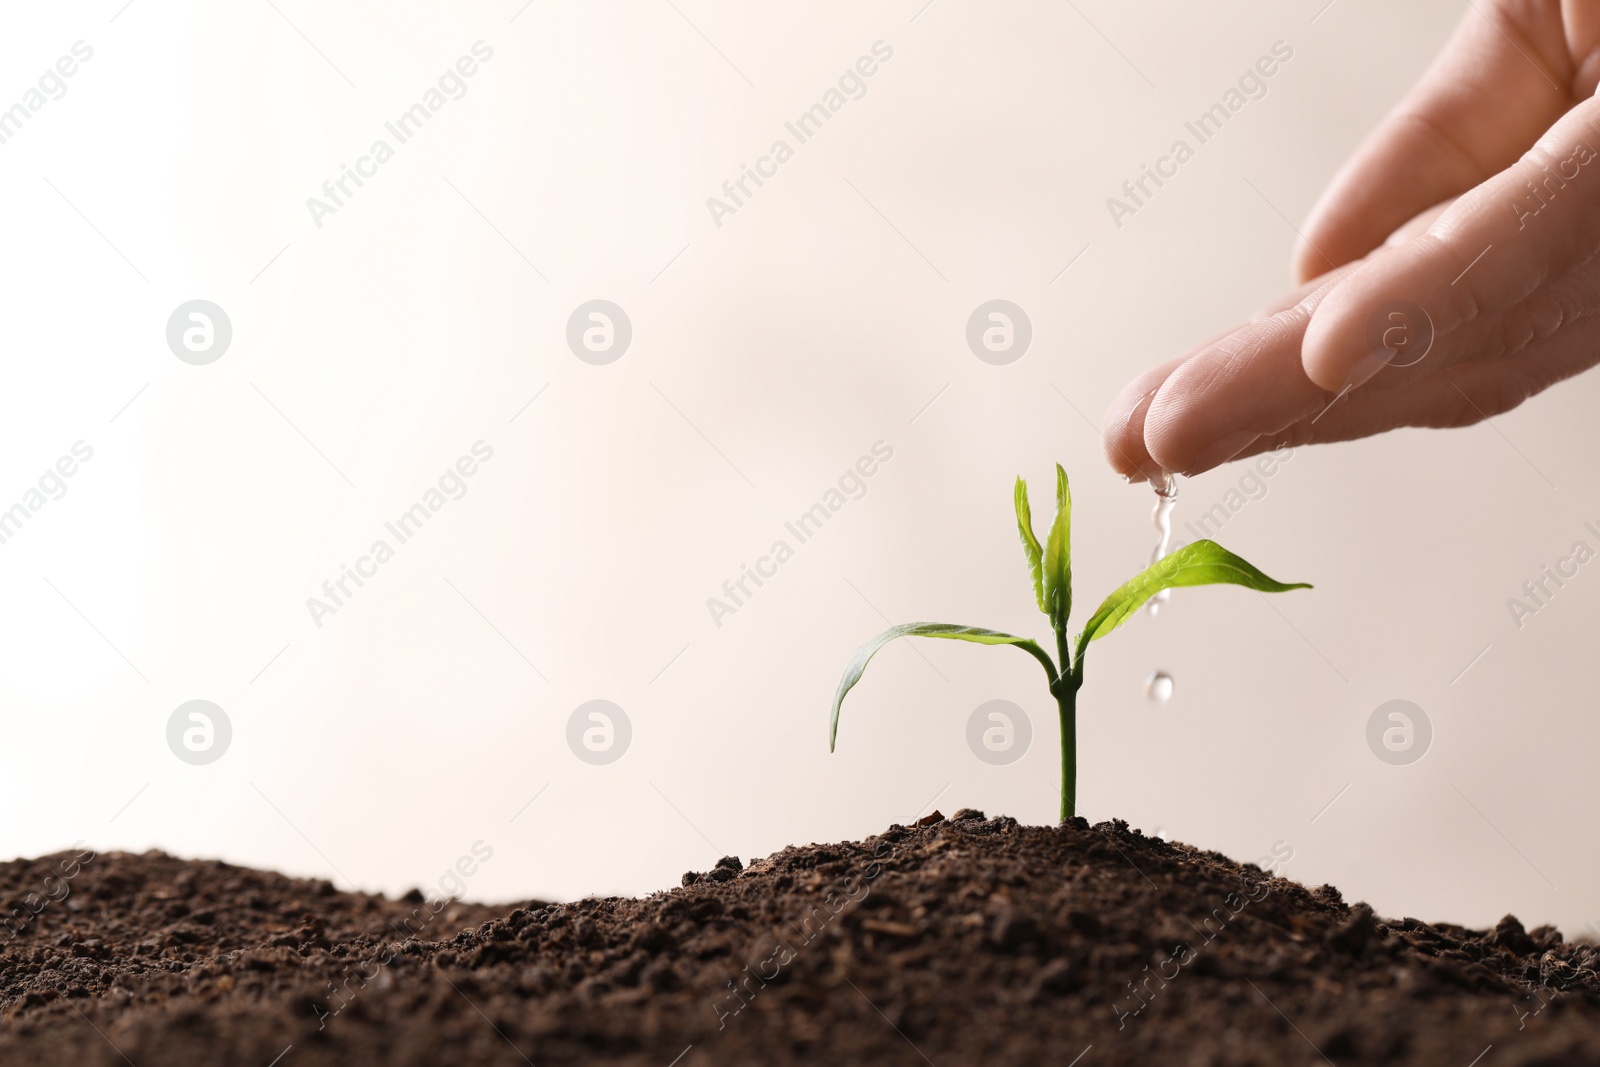 Photo of Woman pouring water on young seedling in soil against light background, closeup